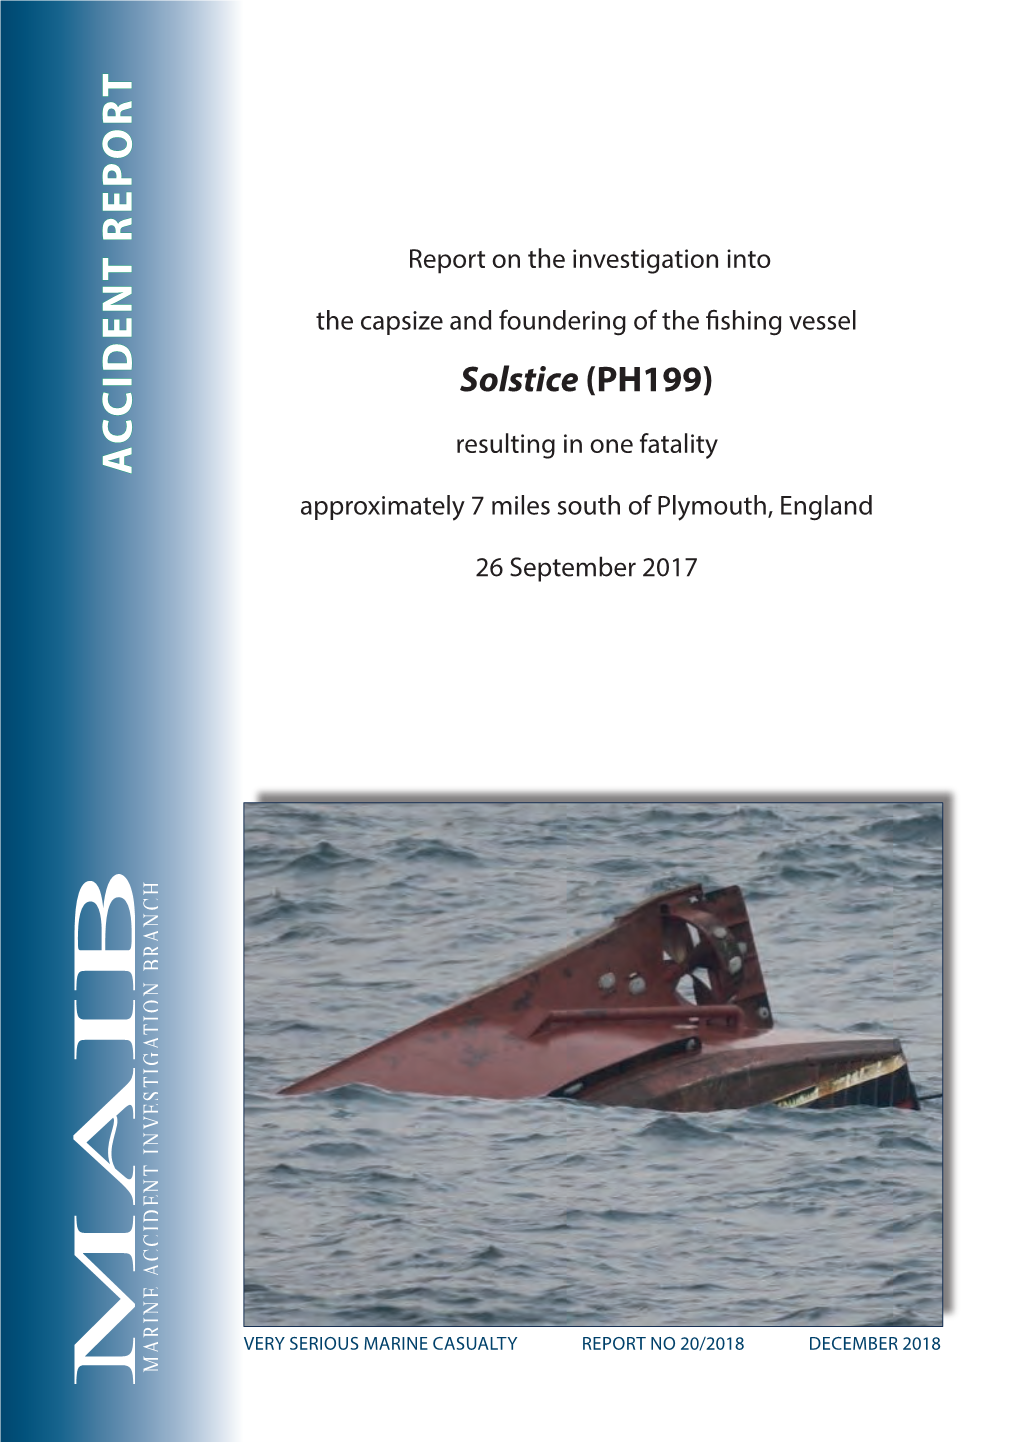 Solstice (PH199) 26 September 2017 Extract from the United Kingdom Merchant Shipping (Accident Reporting and Investigation) Regulations 2012 – Regulation 5